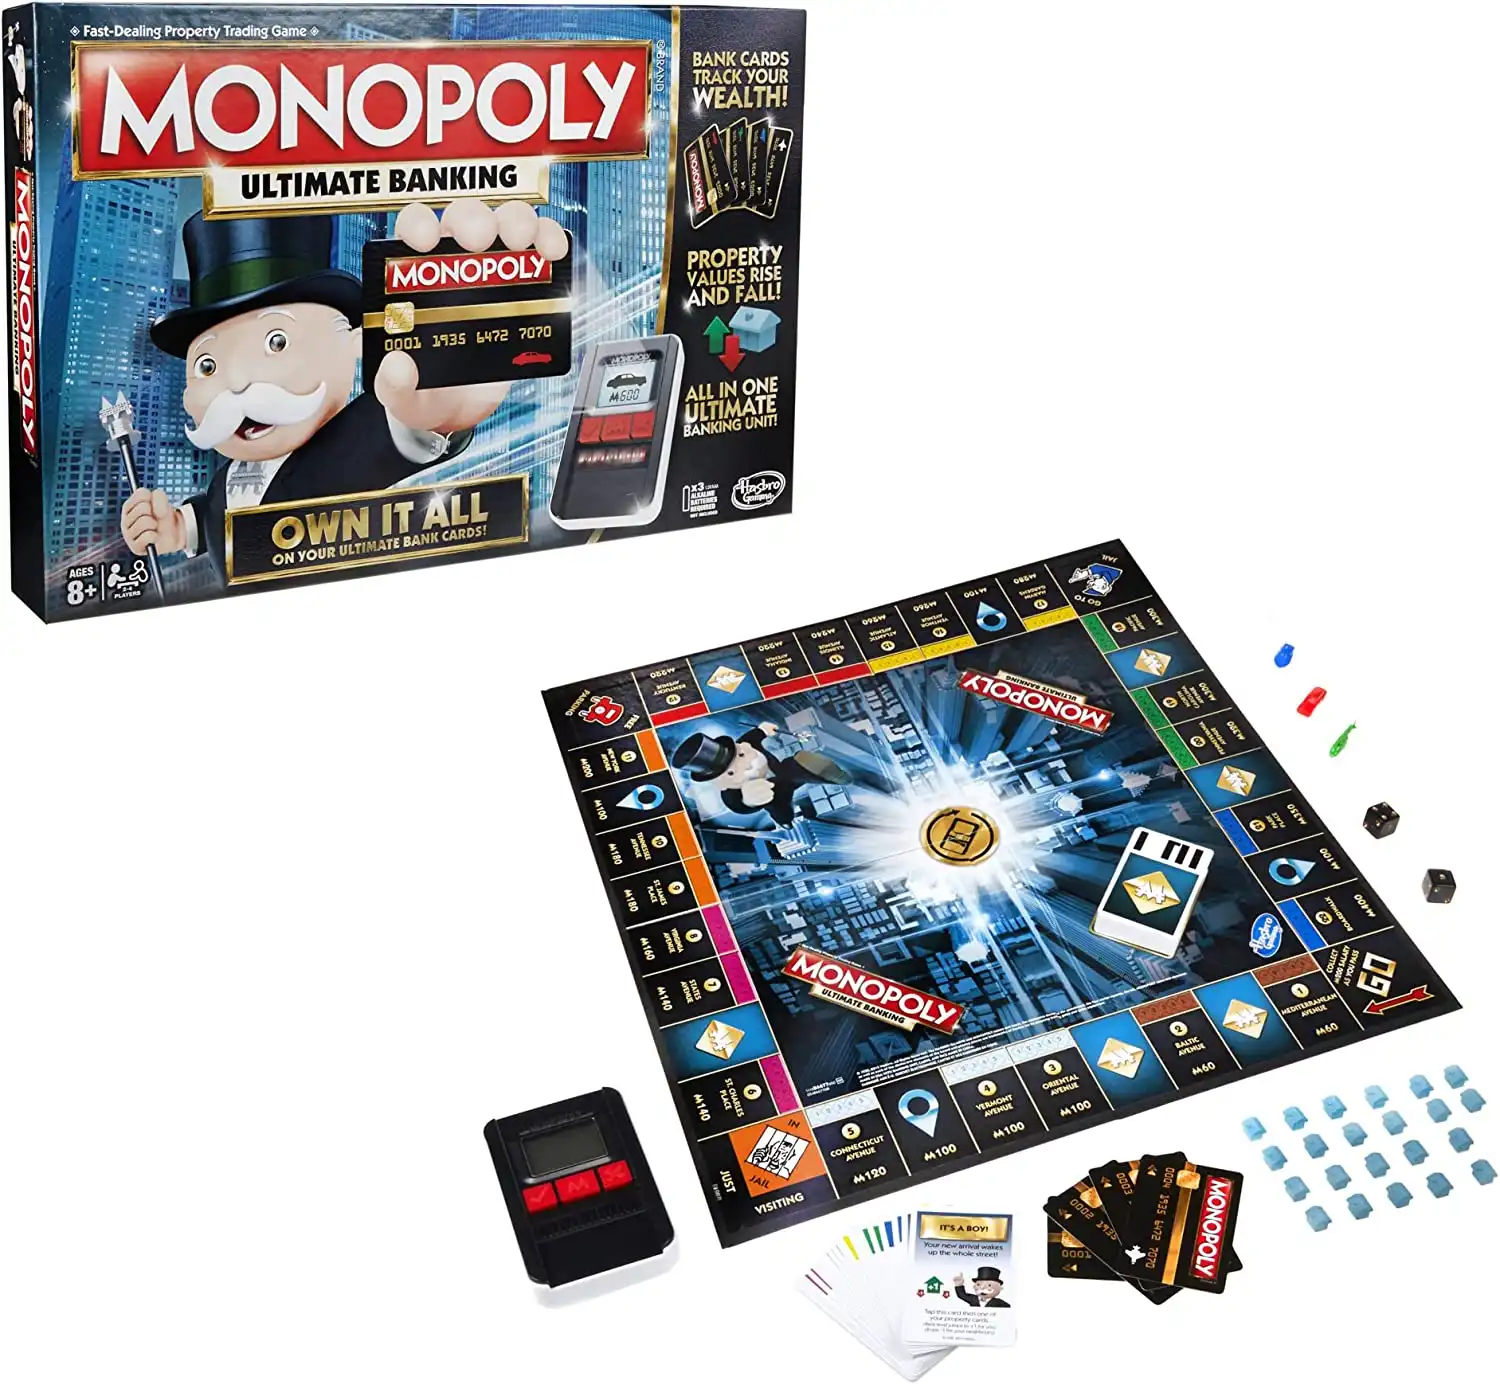 Monopoly: Ultimate Banking (2016) board game box